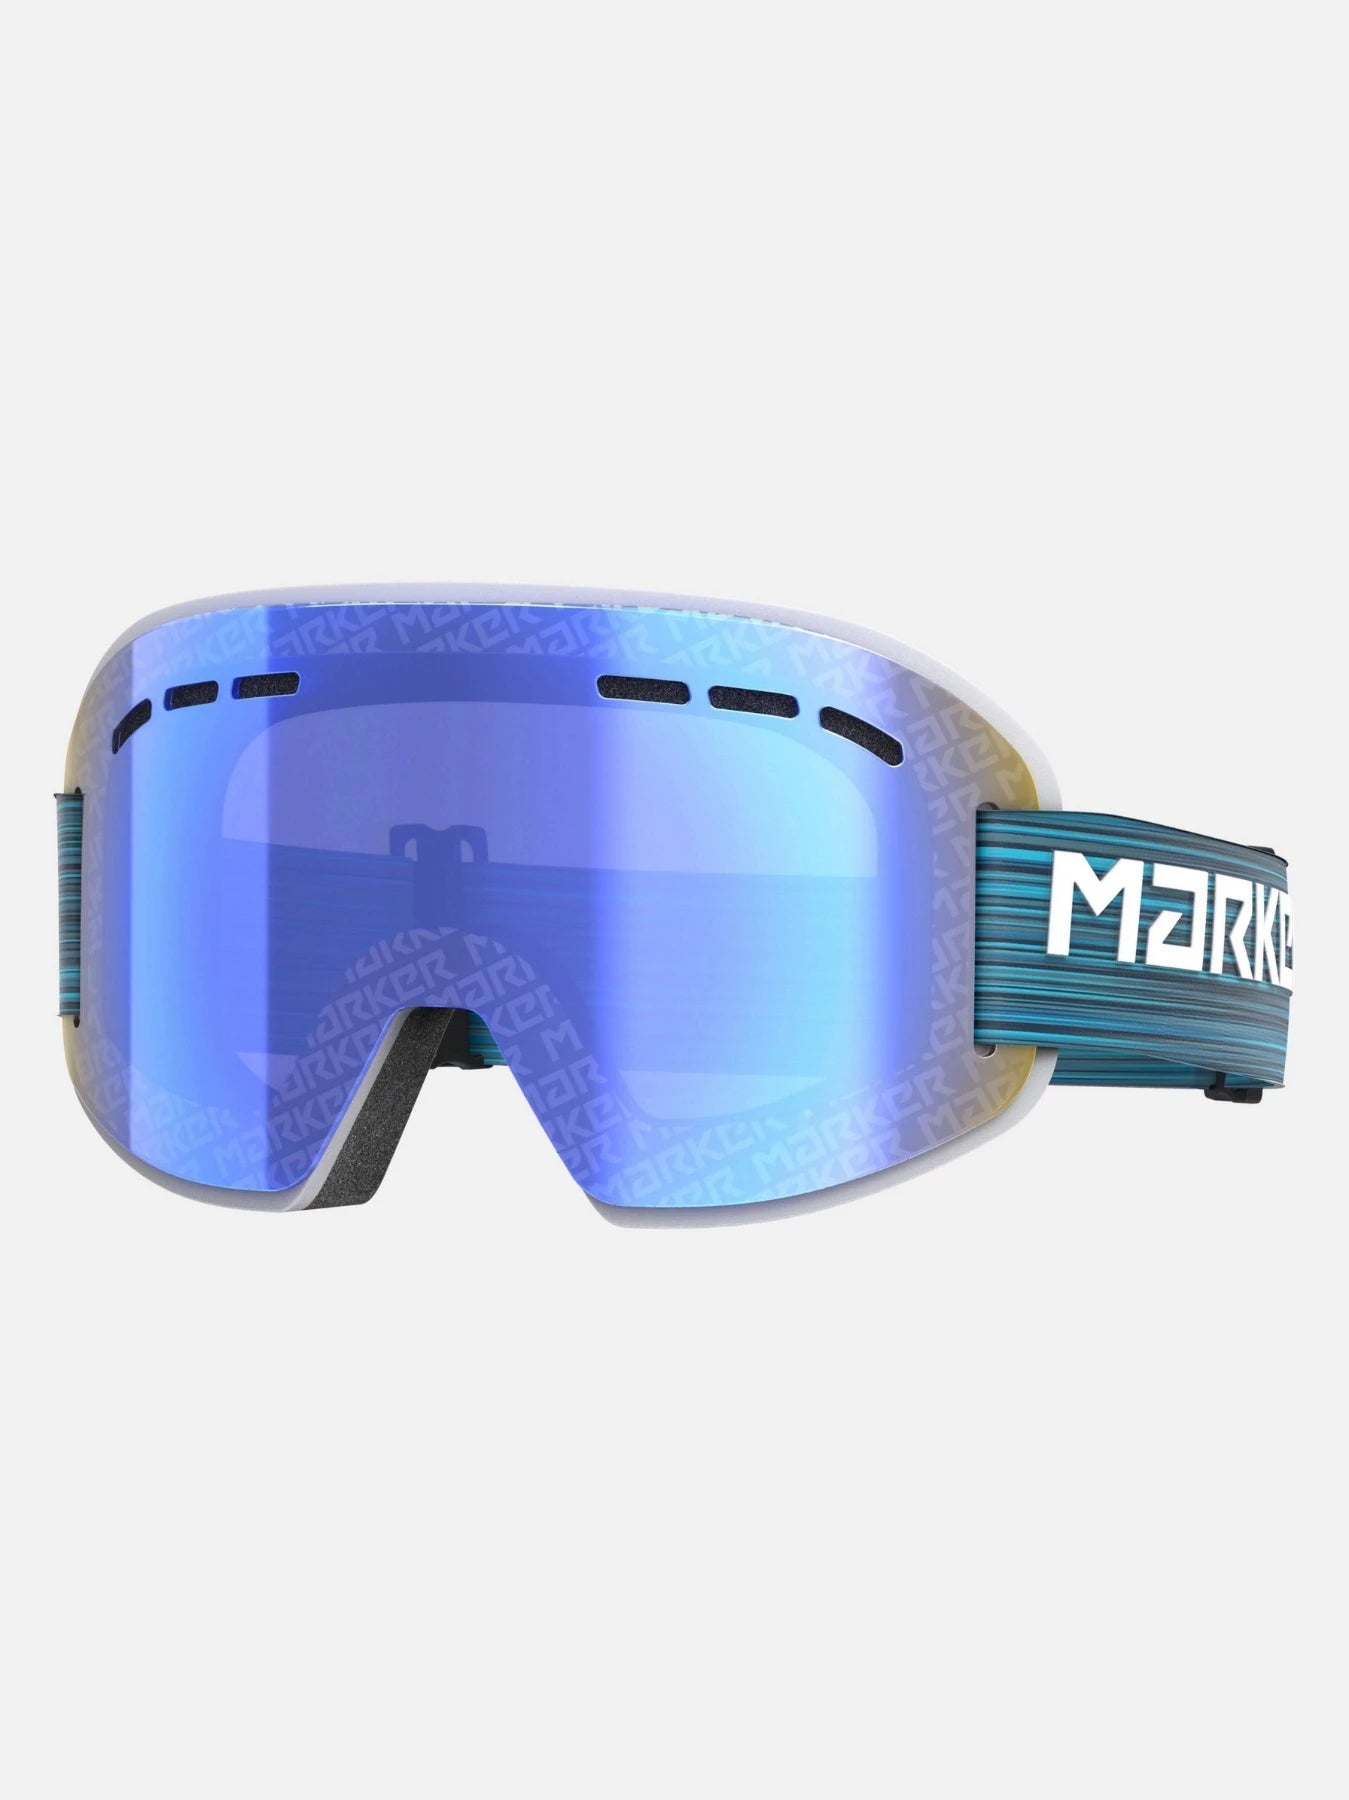 Marker Smooth Operator Goggles Clarity Mirror